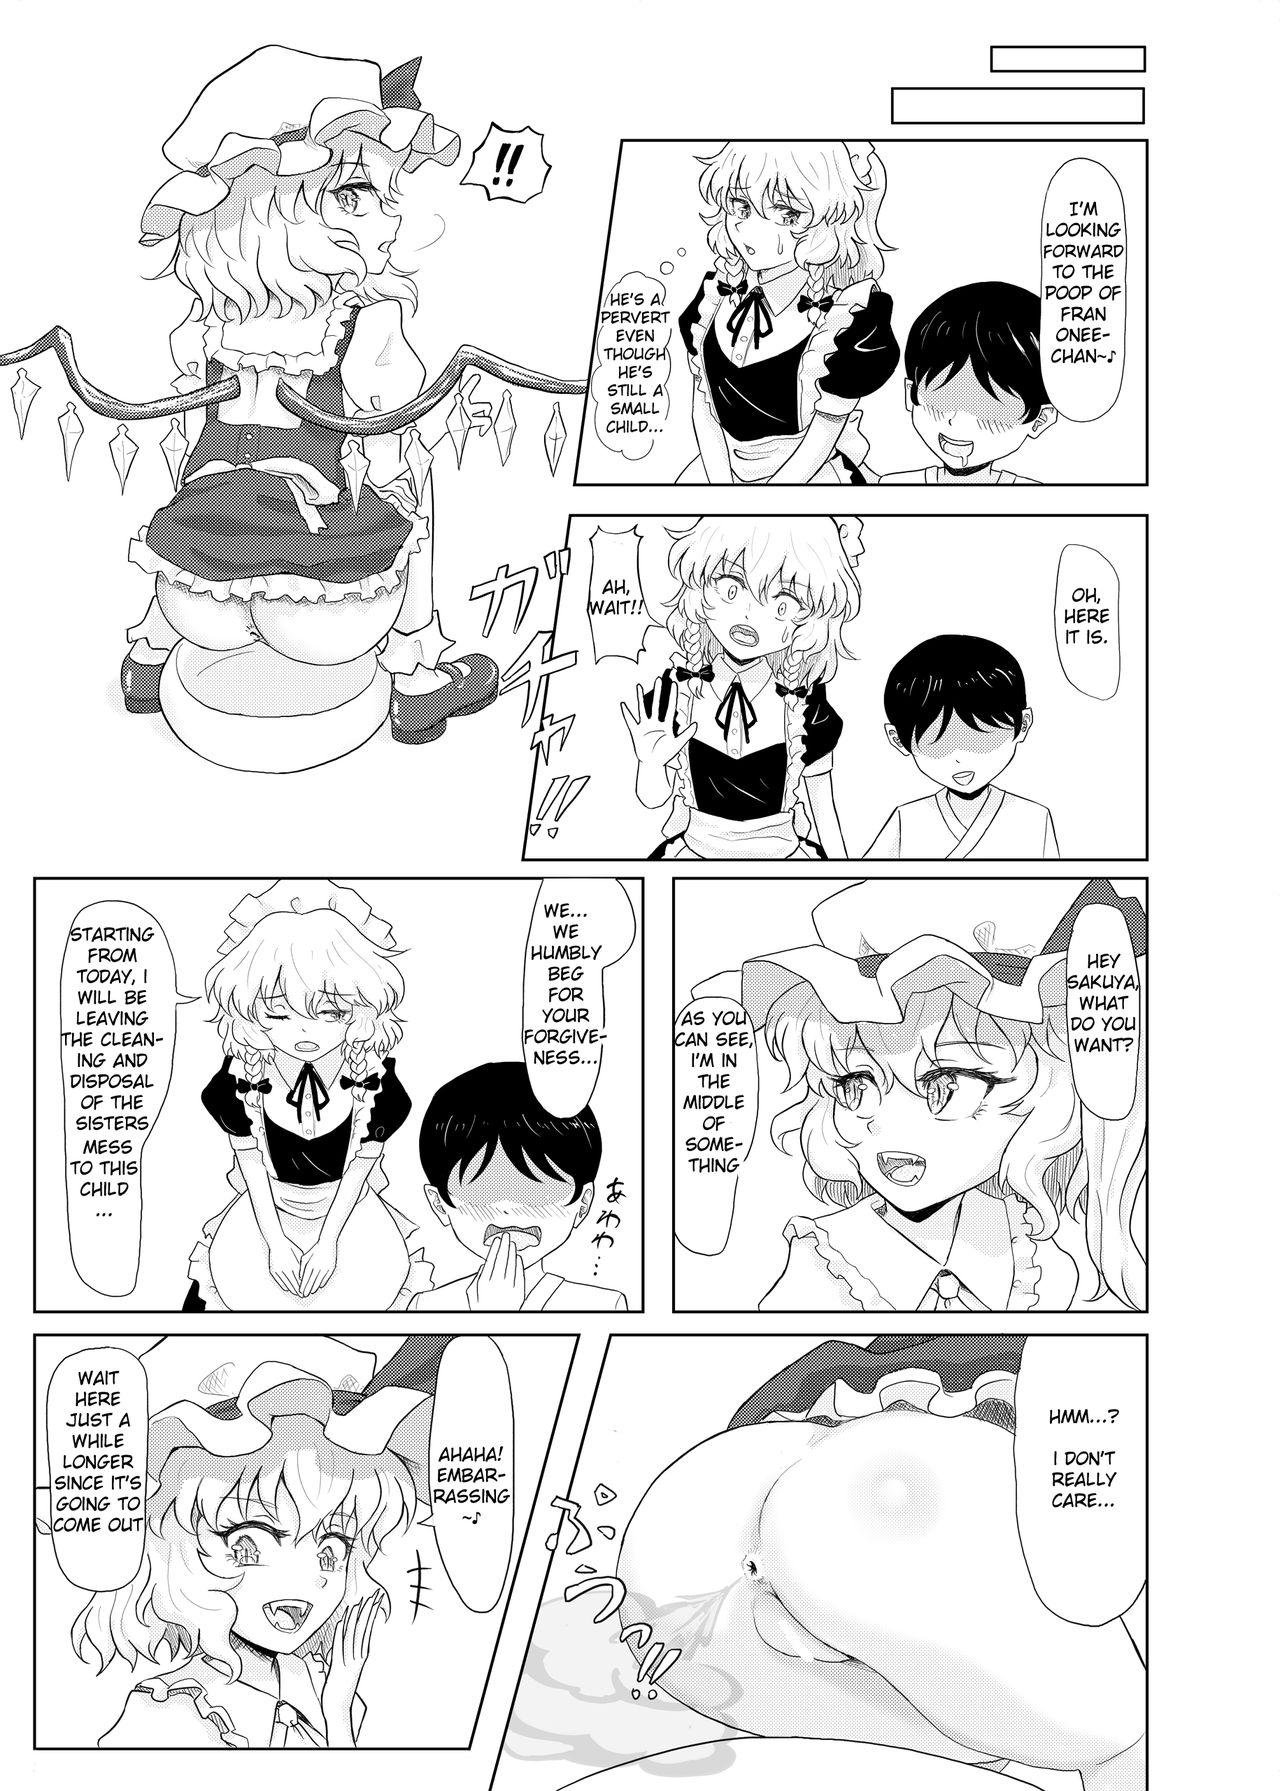 Fetiche Akuma no Yakata no Omaru Jijou | The Toilet situation of the Devils Mansion - Touhou project Celebrity - Page 3